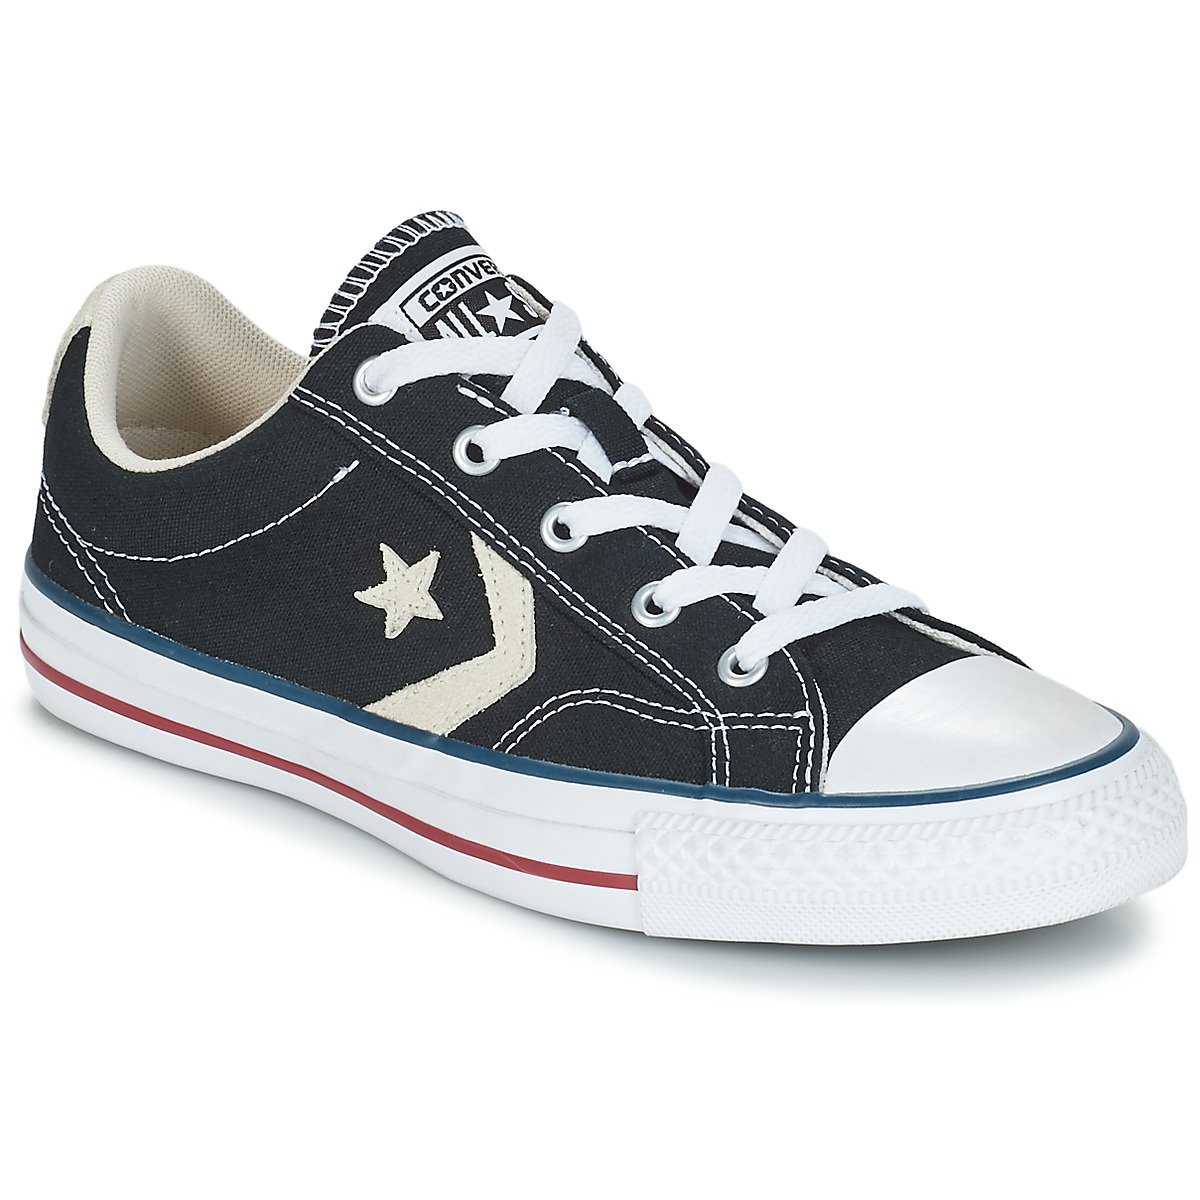 converse star player size 8